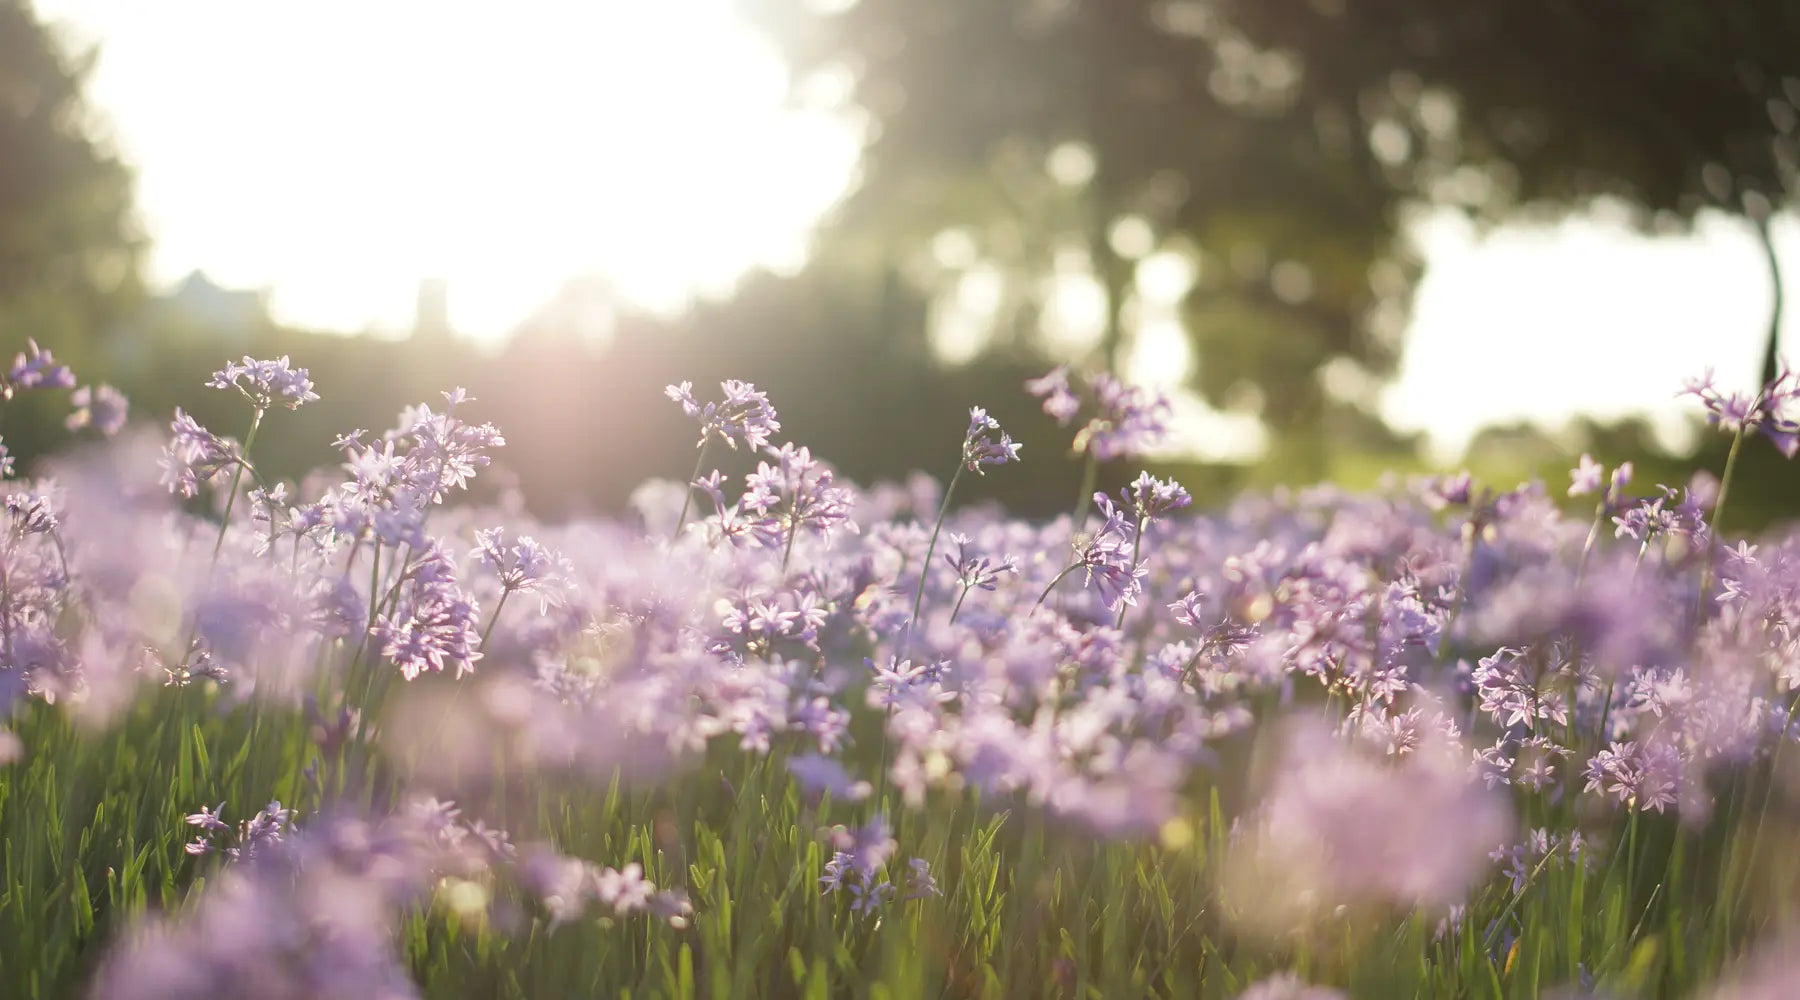 Bright sunlight over a field of lavender